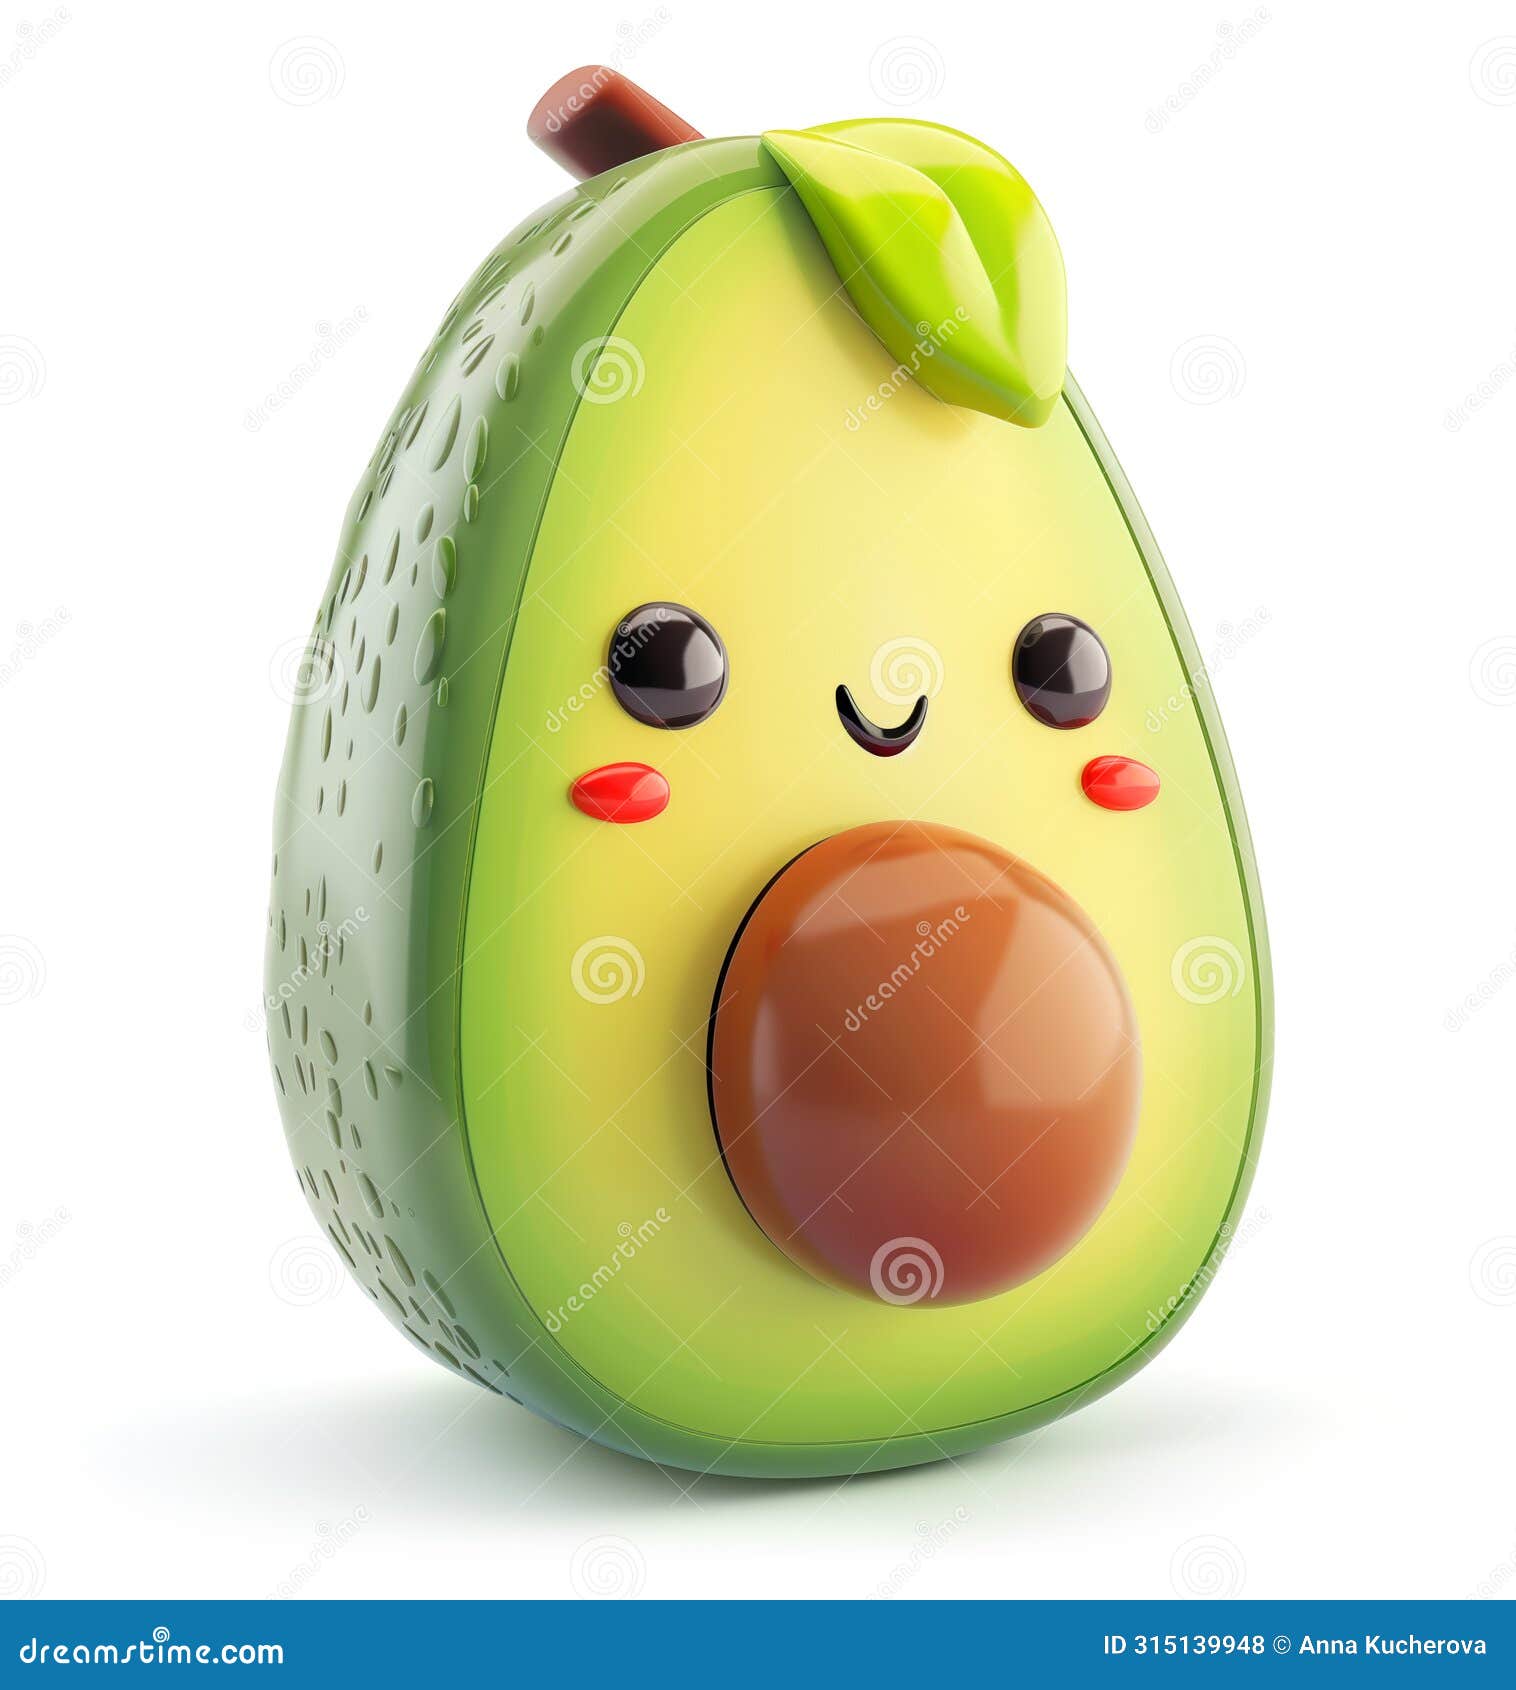 adorable avocado character with rosy cheeks